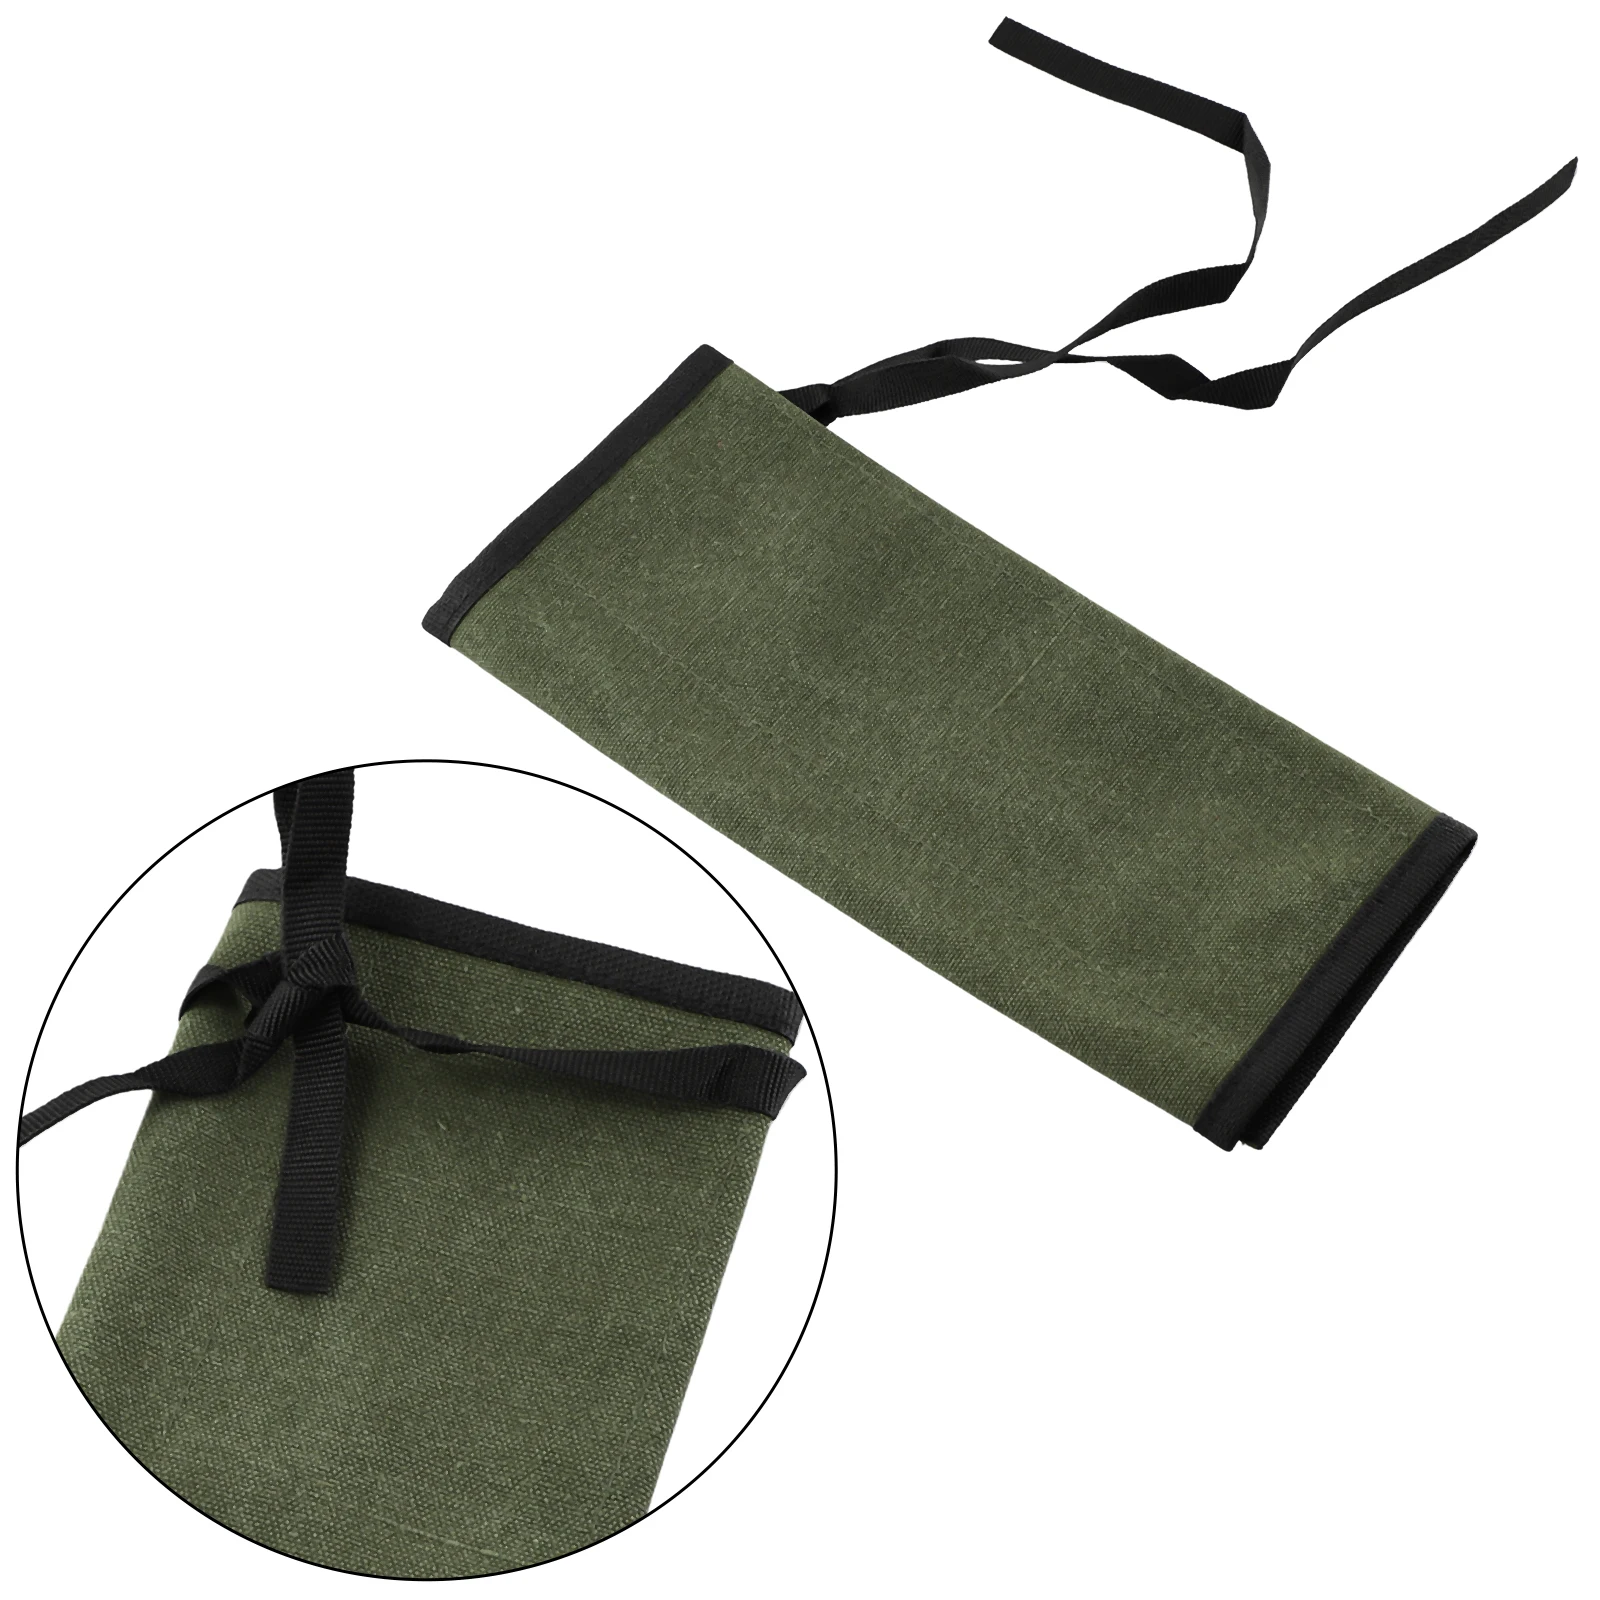 

Roll Up Tool Bag 1 PC 33x27cm Accessory Green Hanging Tool Multi-Purpose Multiple Pockets Organize Oxford Cloth